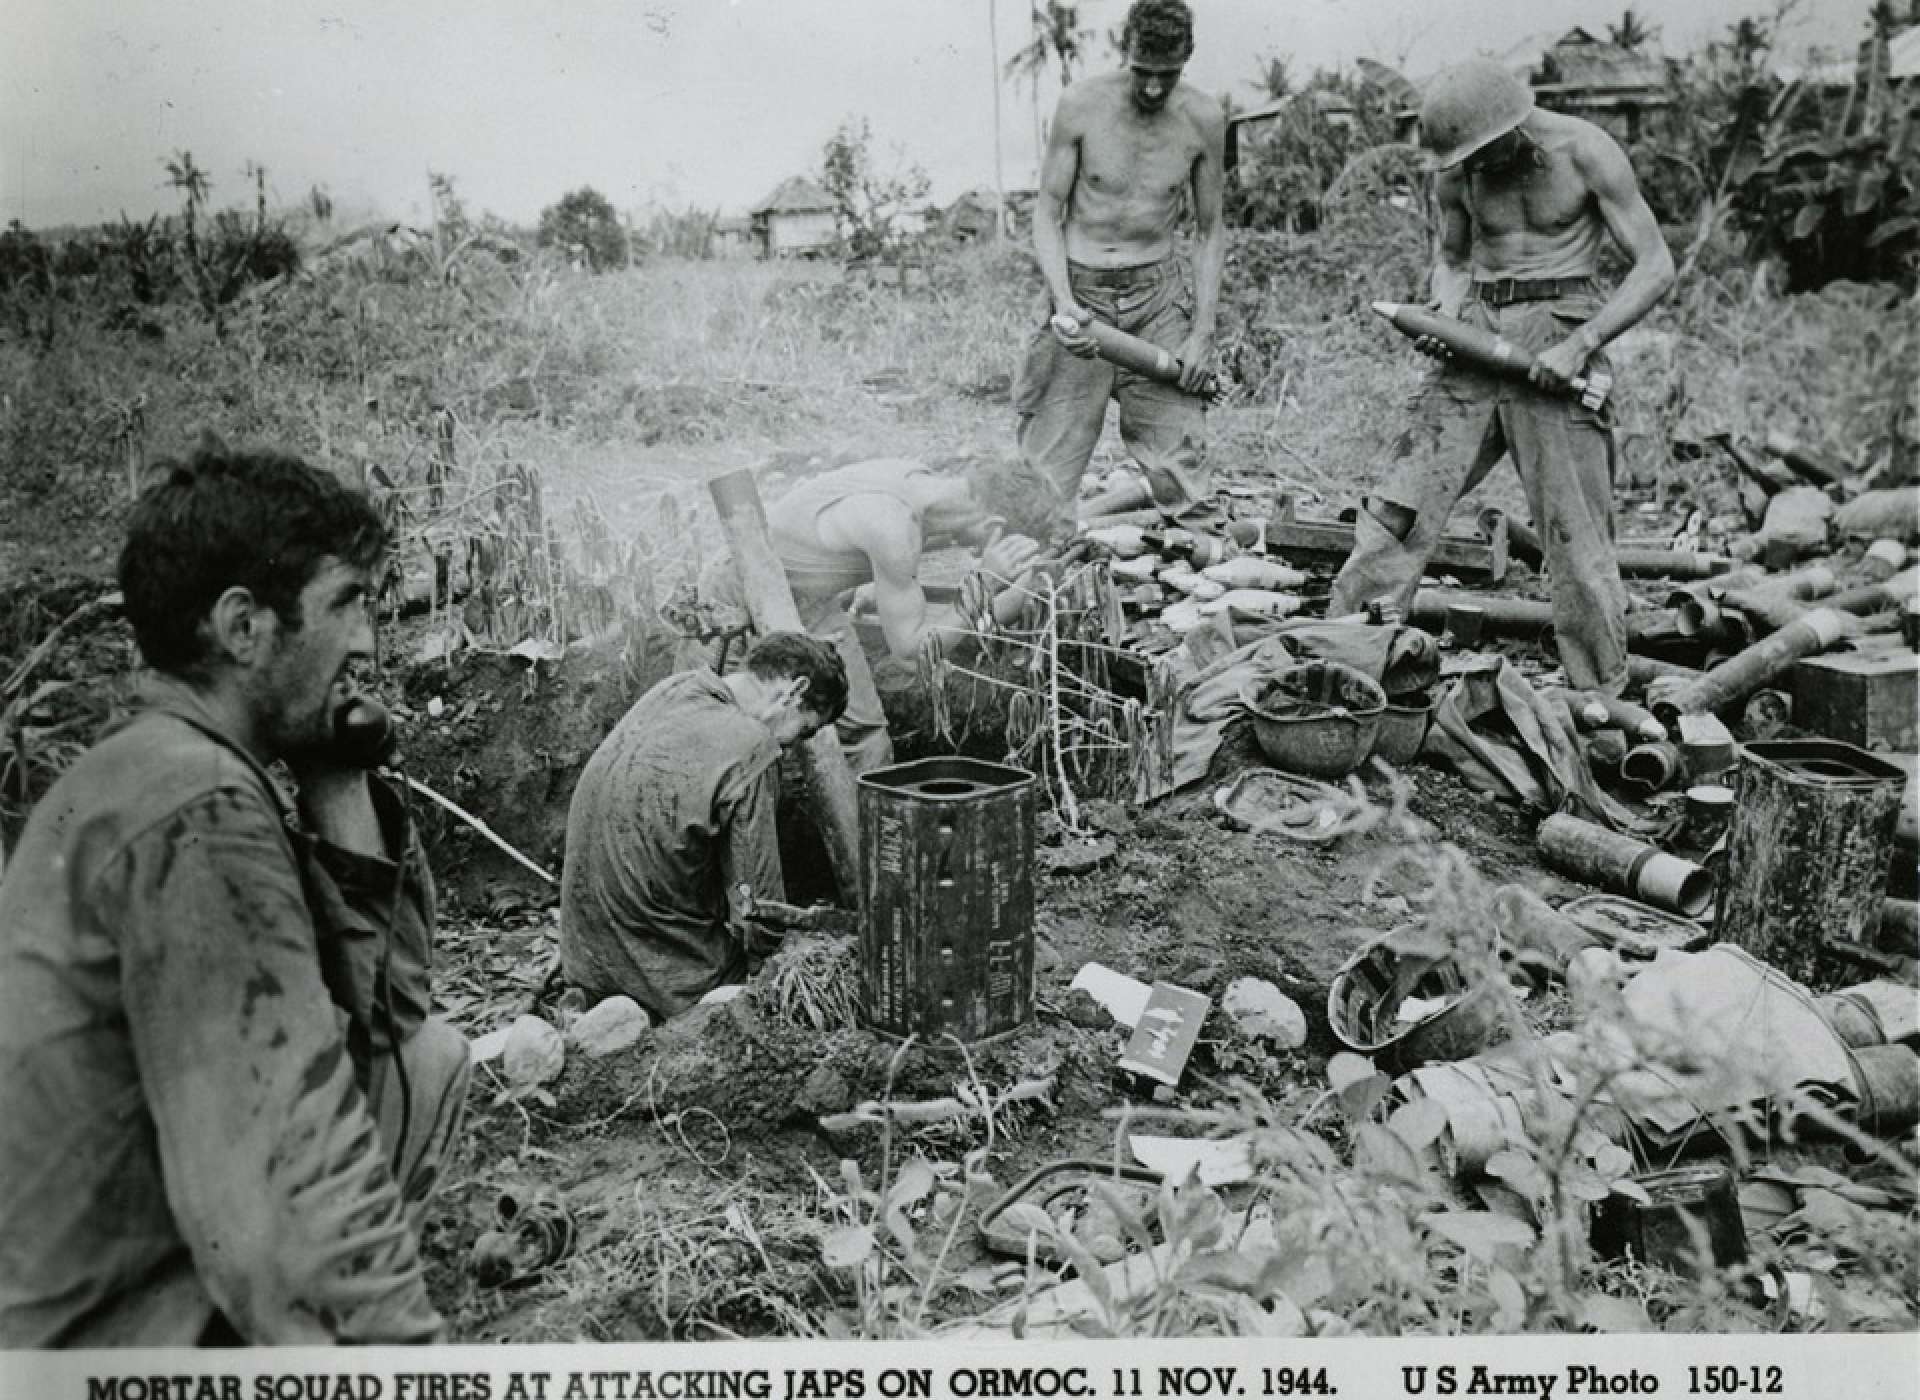 Two United States Army soldiers holding mortar bombs next to two other soldiers who are firing the mortar; another soldier is talking into a field telephone. Official caption on front: &quot;Mortar squad fires at attacking Japs on Ormoc, 11 Nov. 1944. US Army Photo 150-12.&quot; Ormoc, Leyte, Philippines. 11 November 1944. Gift in memory of Sgt. Lyle E. Eberspecher, 2013.495.930